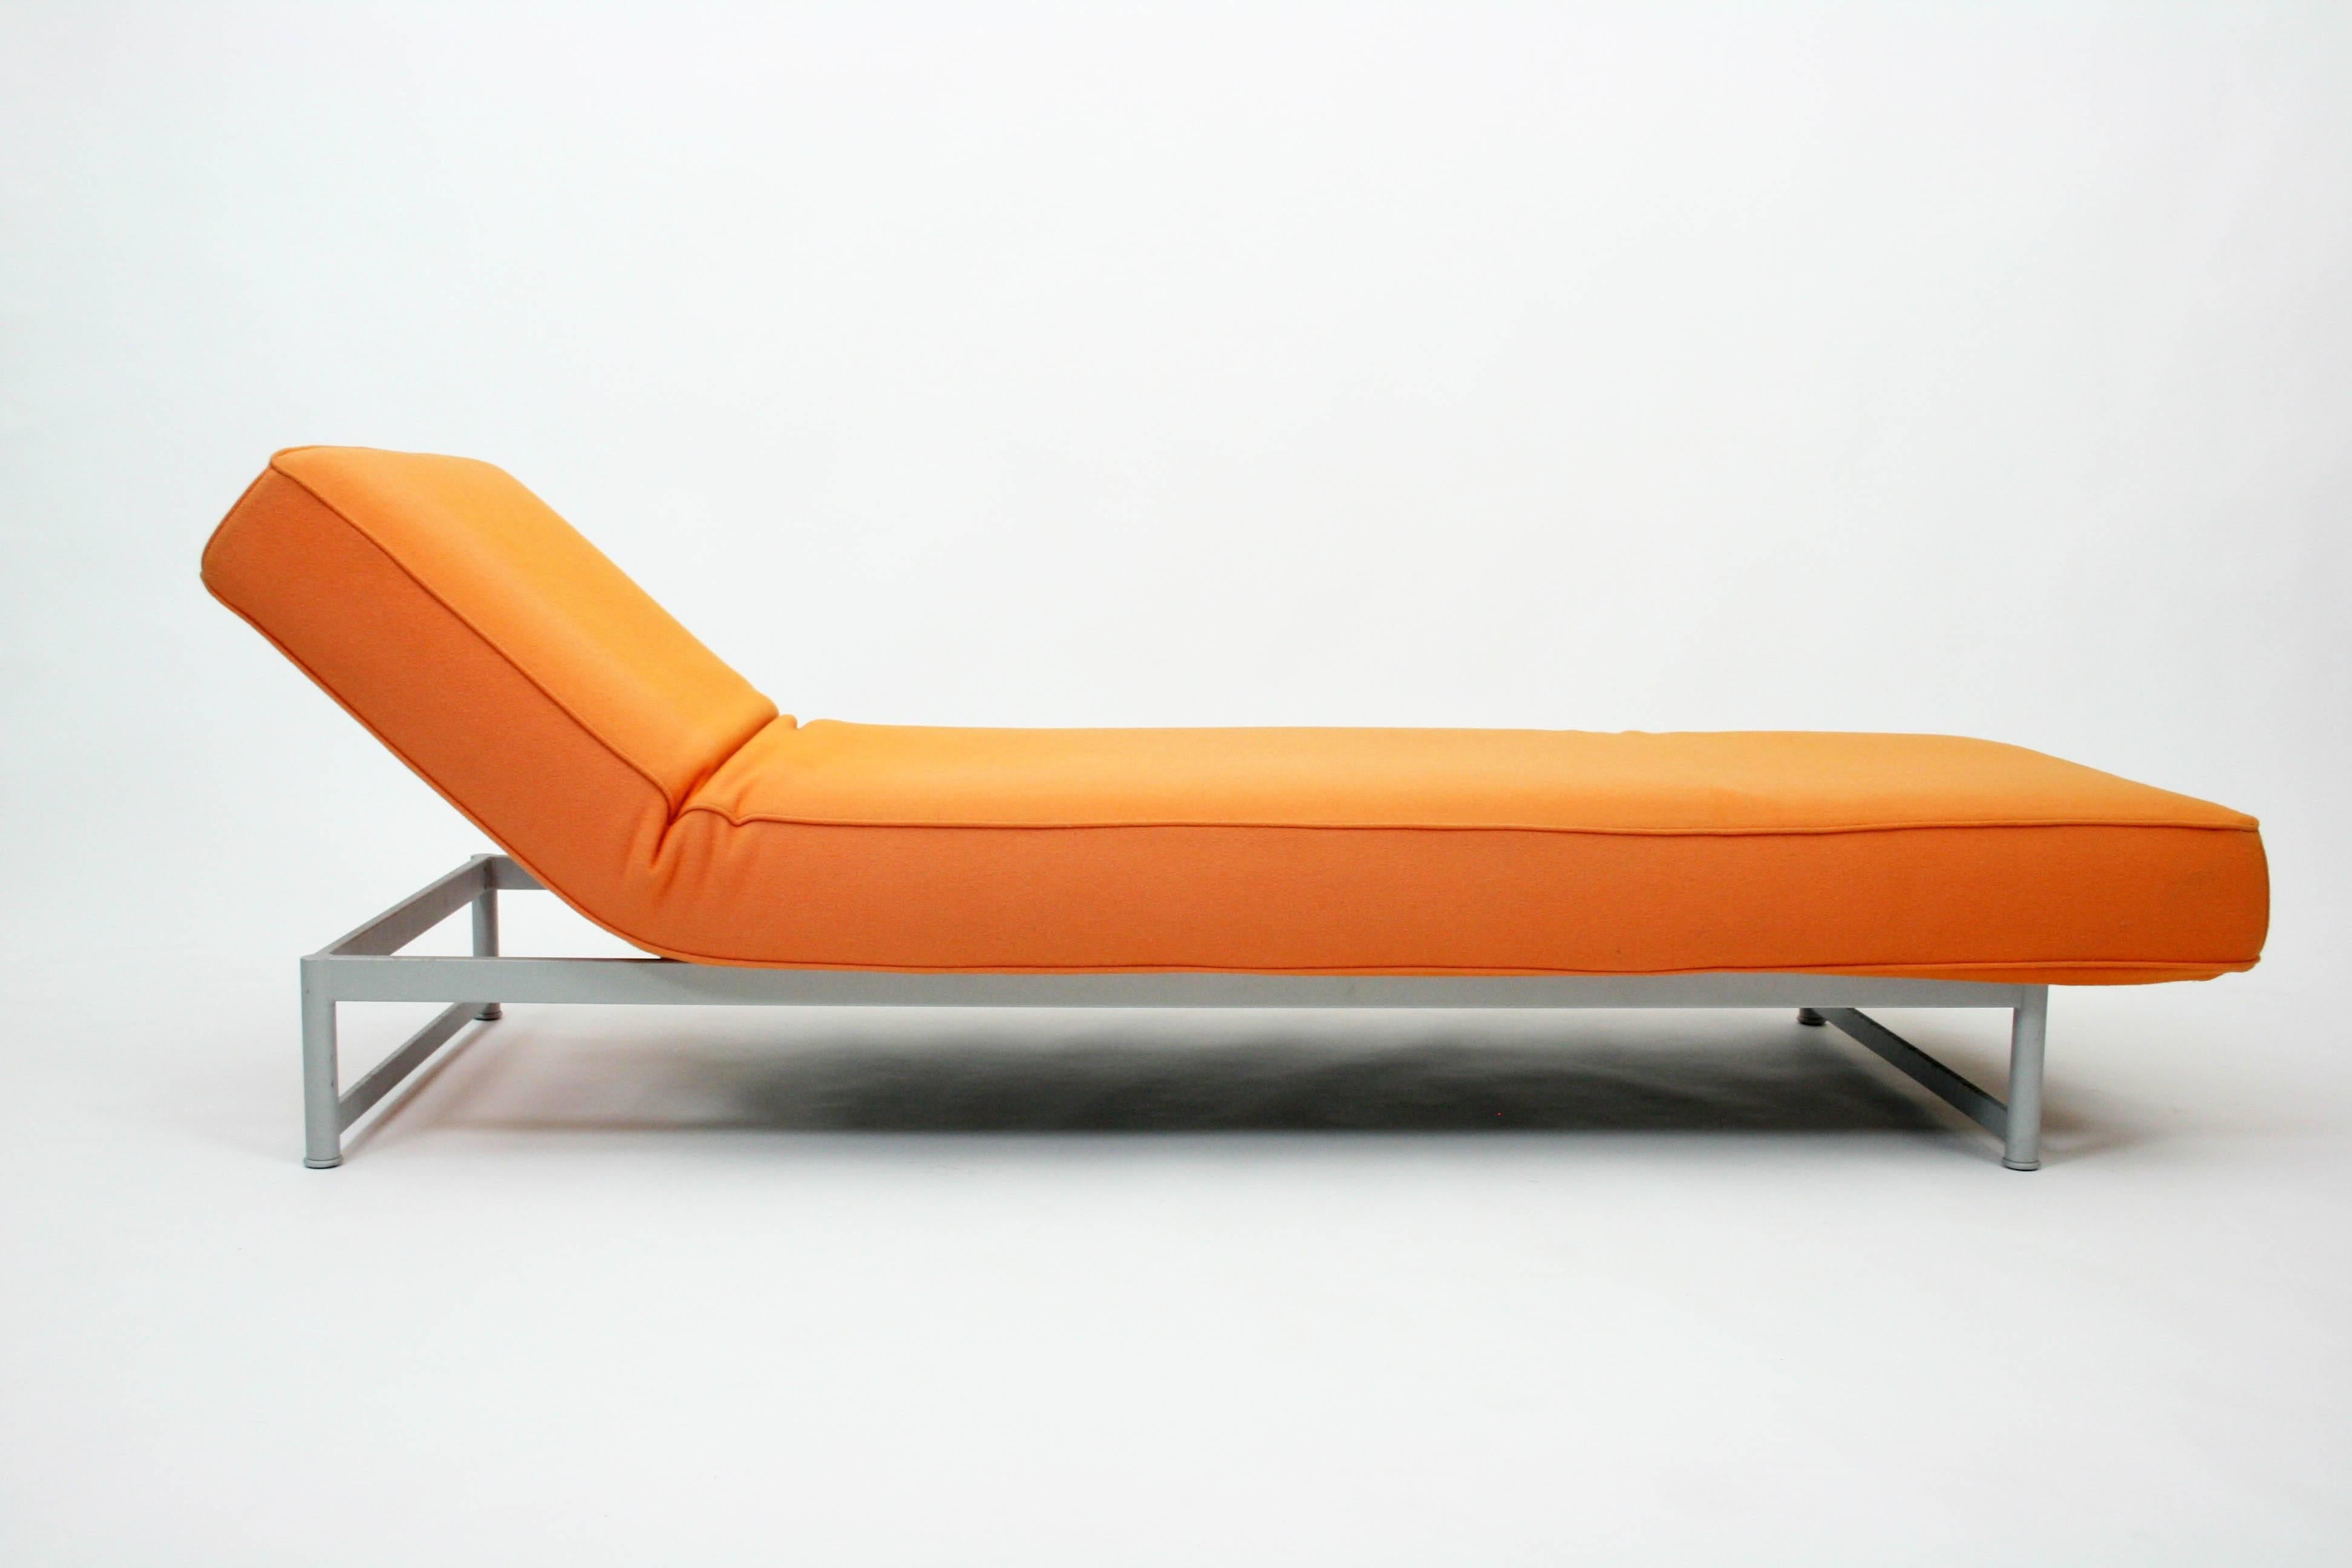 Piero Lissoni Reef daybed chaise in orange felt for Cassina. The chaise is adjustable. The bench has a suitable seat for a chaise-longue configuration; one end part can be tilted at four different positions to be used as headrest, the other end part